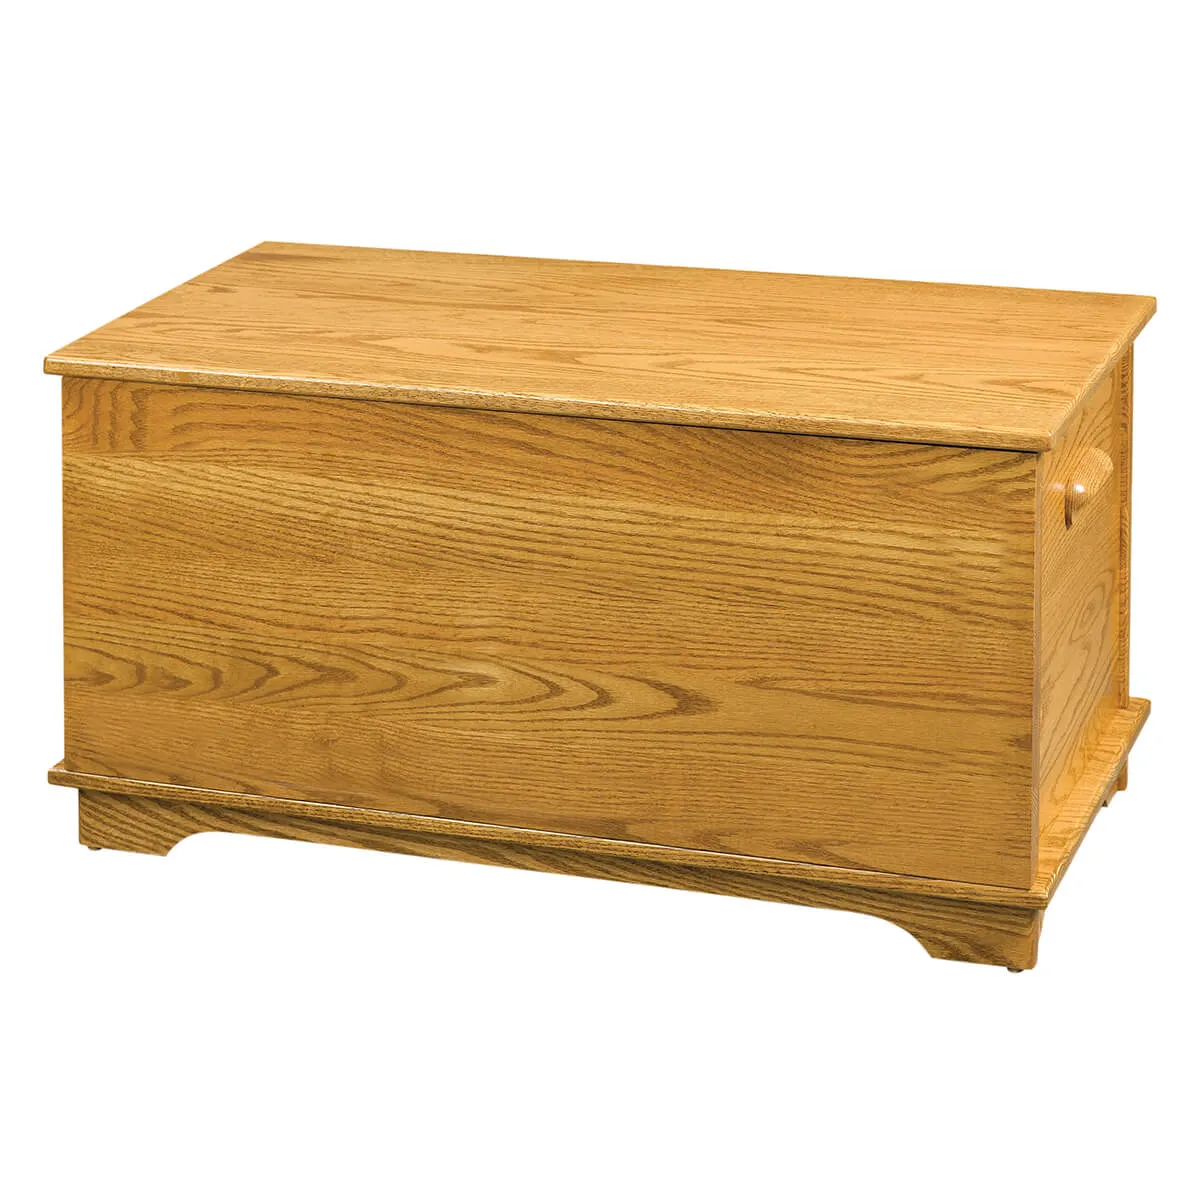 109-A Shaker Plain Front Toy Box